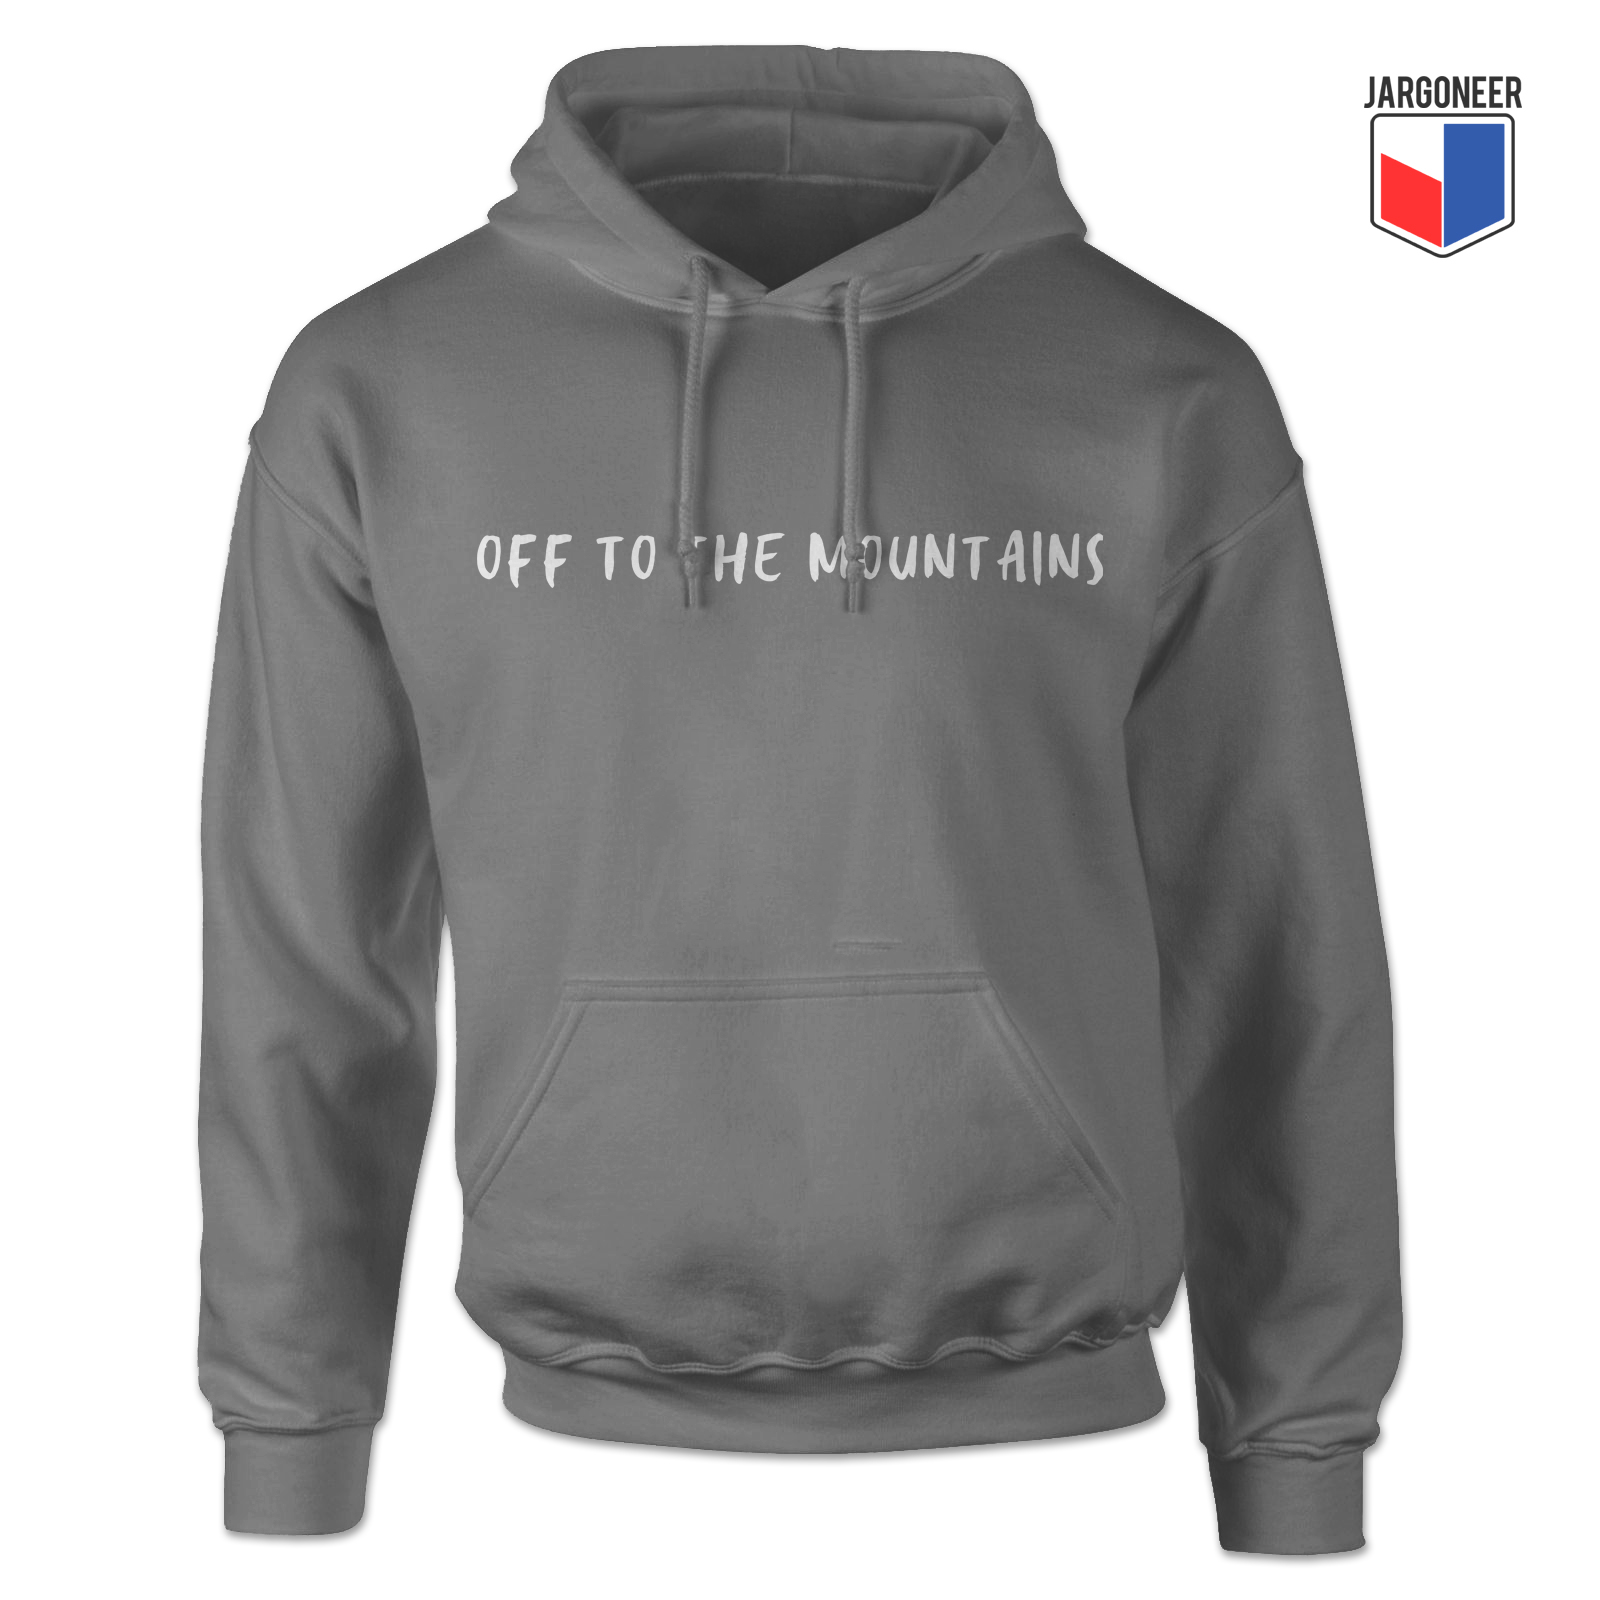 Off To The Mountains Grey Hoodie - Shop Unique Graphic Cool Shirt Designs